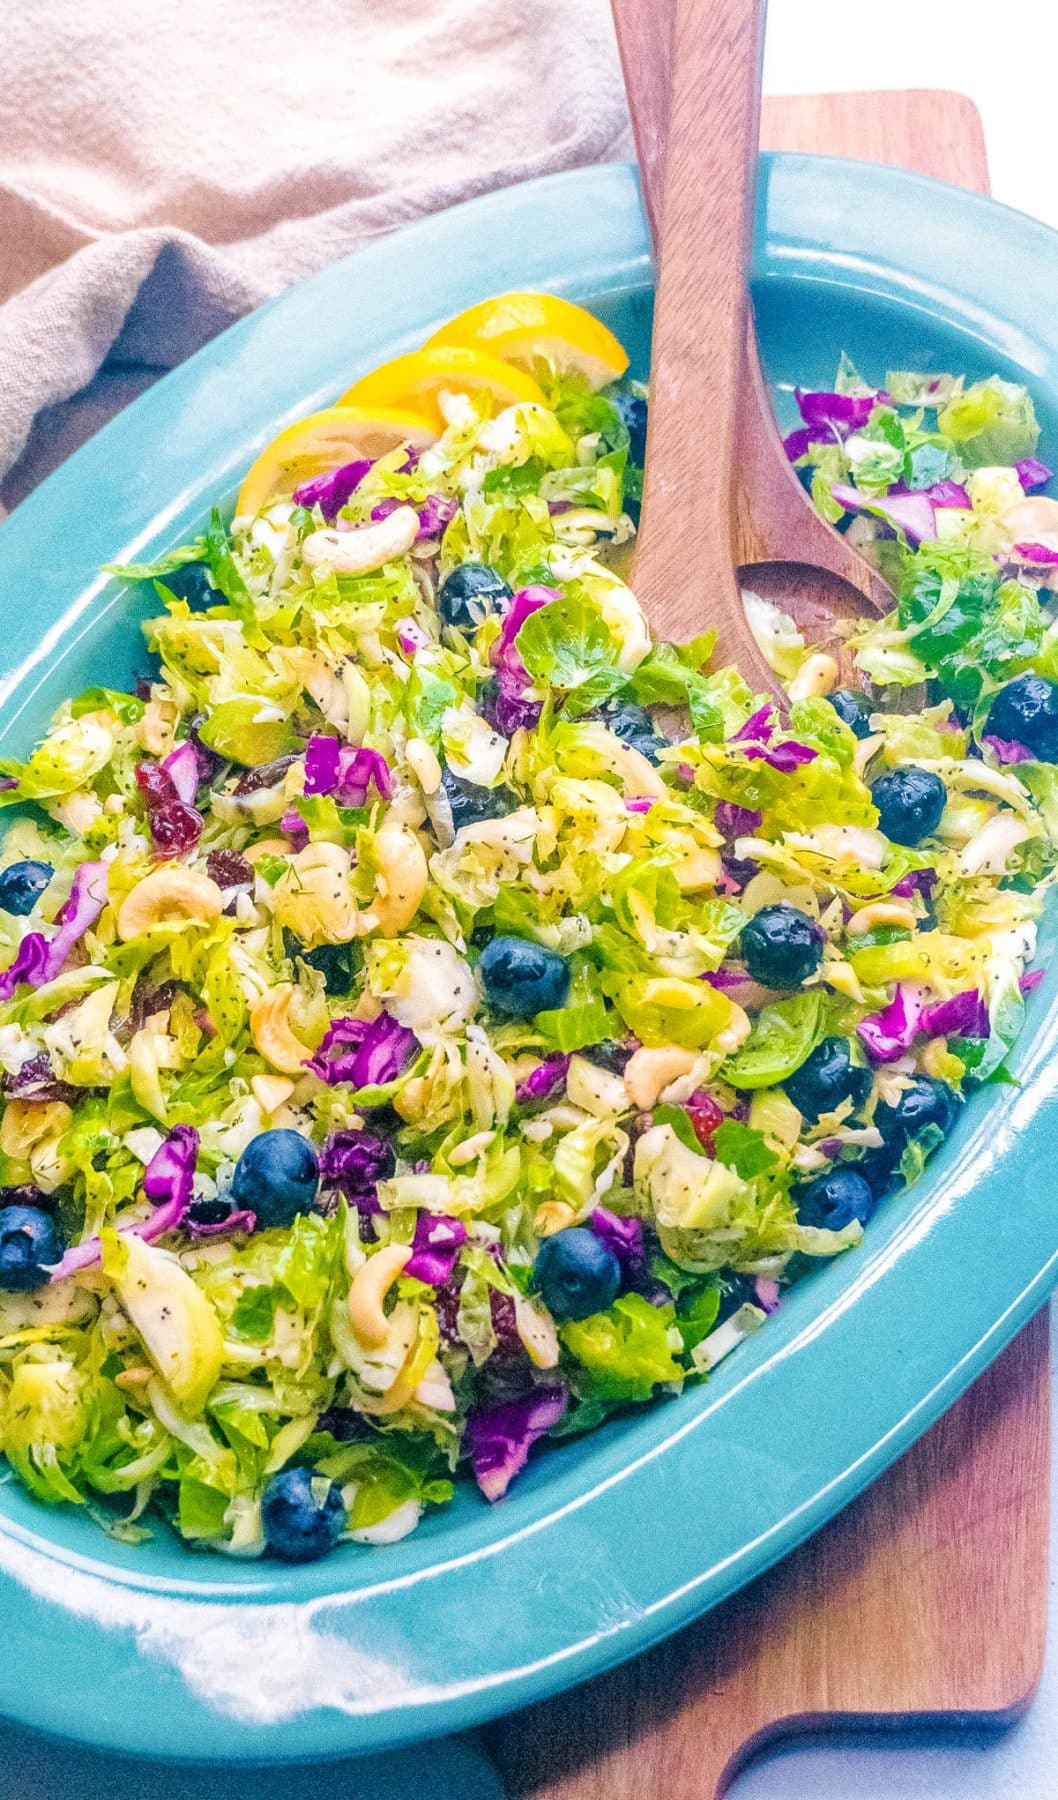 An overhead picture of the finished Brussel Sprout Salad in a blue bowl.